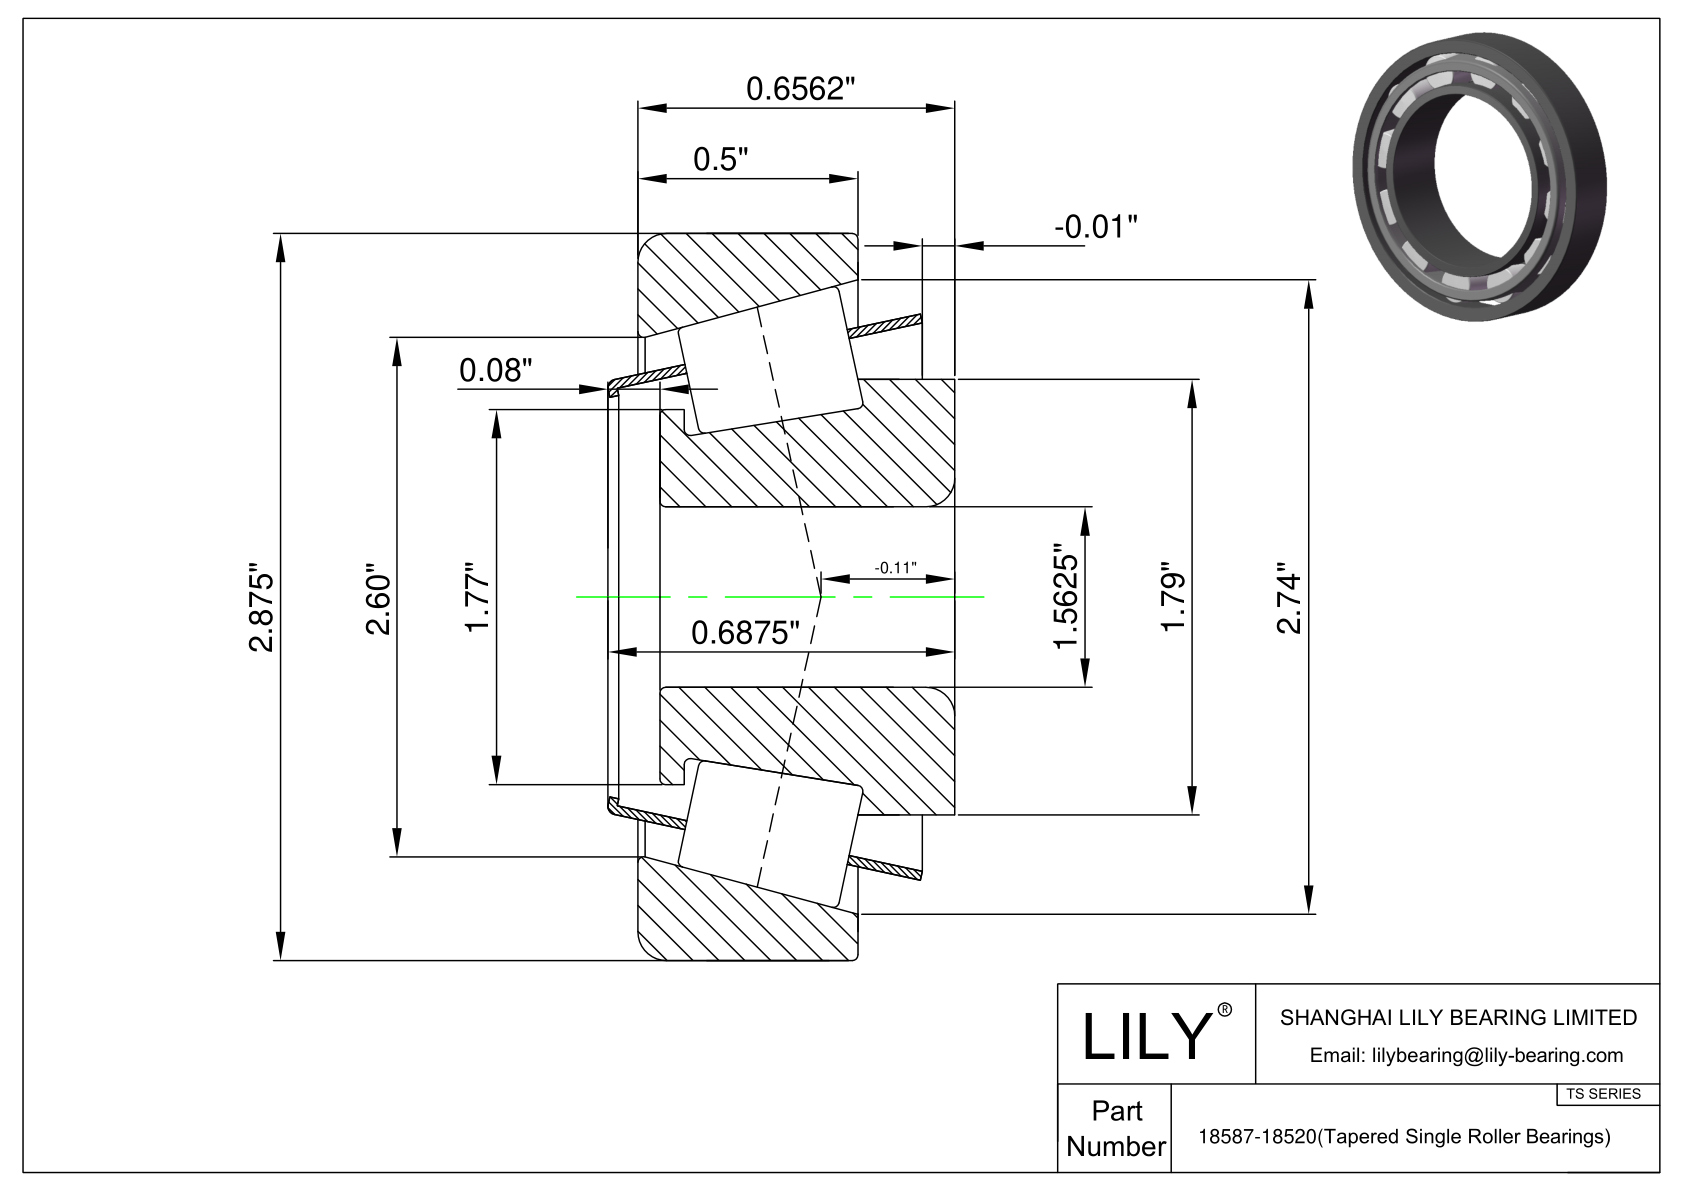 18587-18520 TS (Tapered Single Roller Bearings) (Imperial) cad drawing